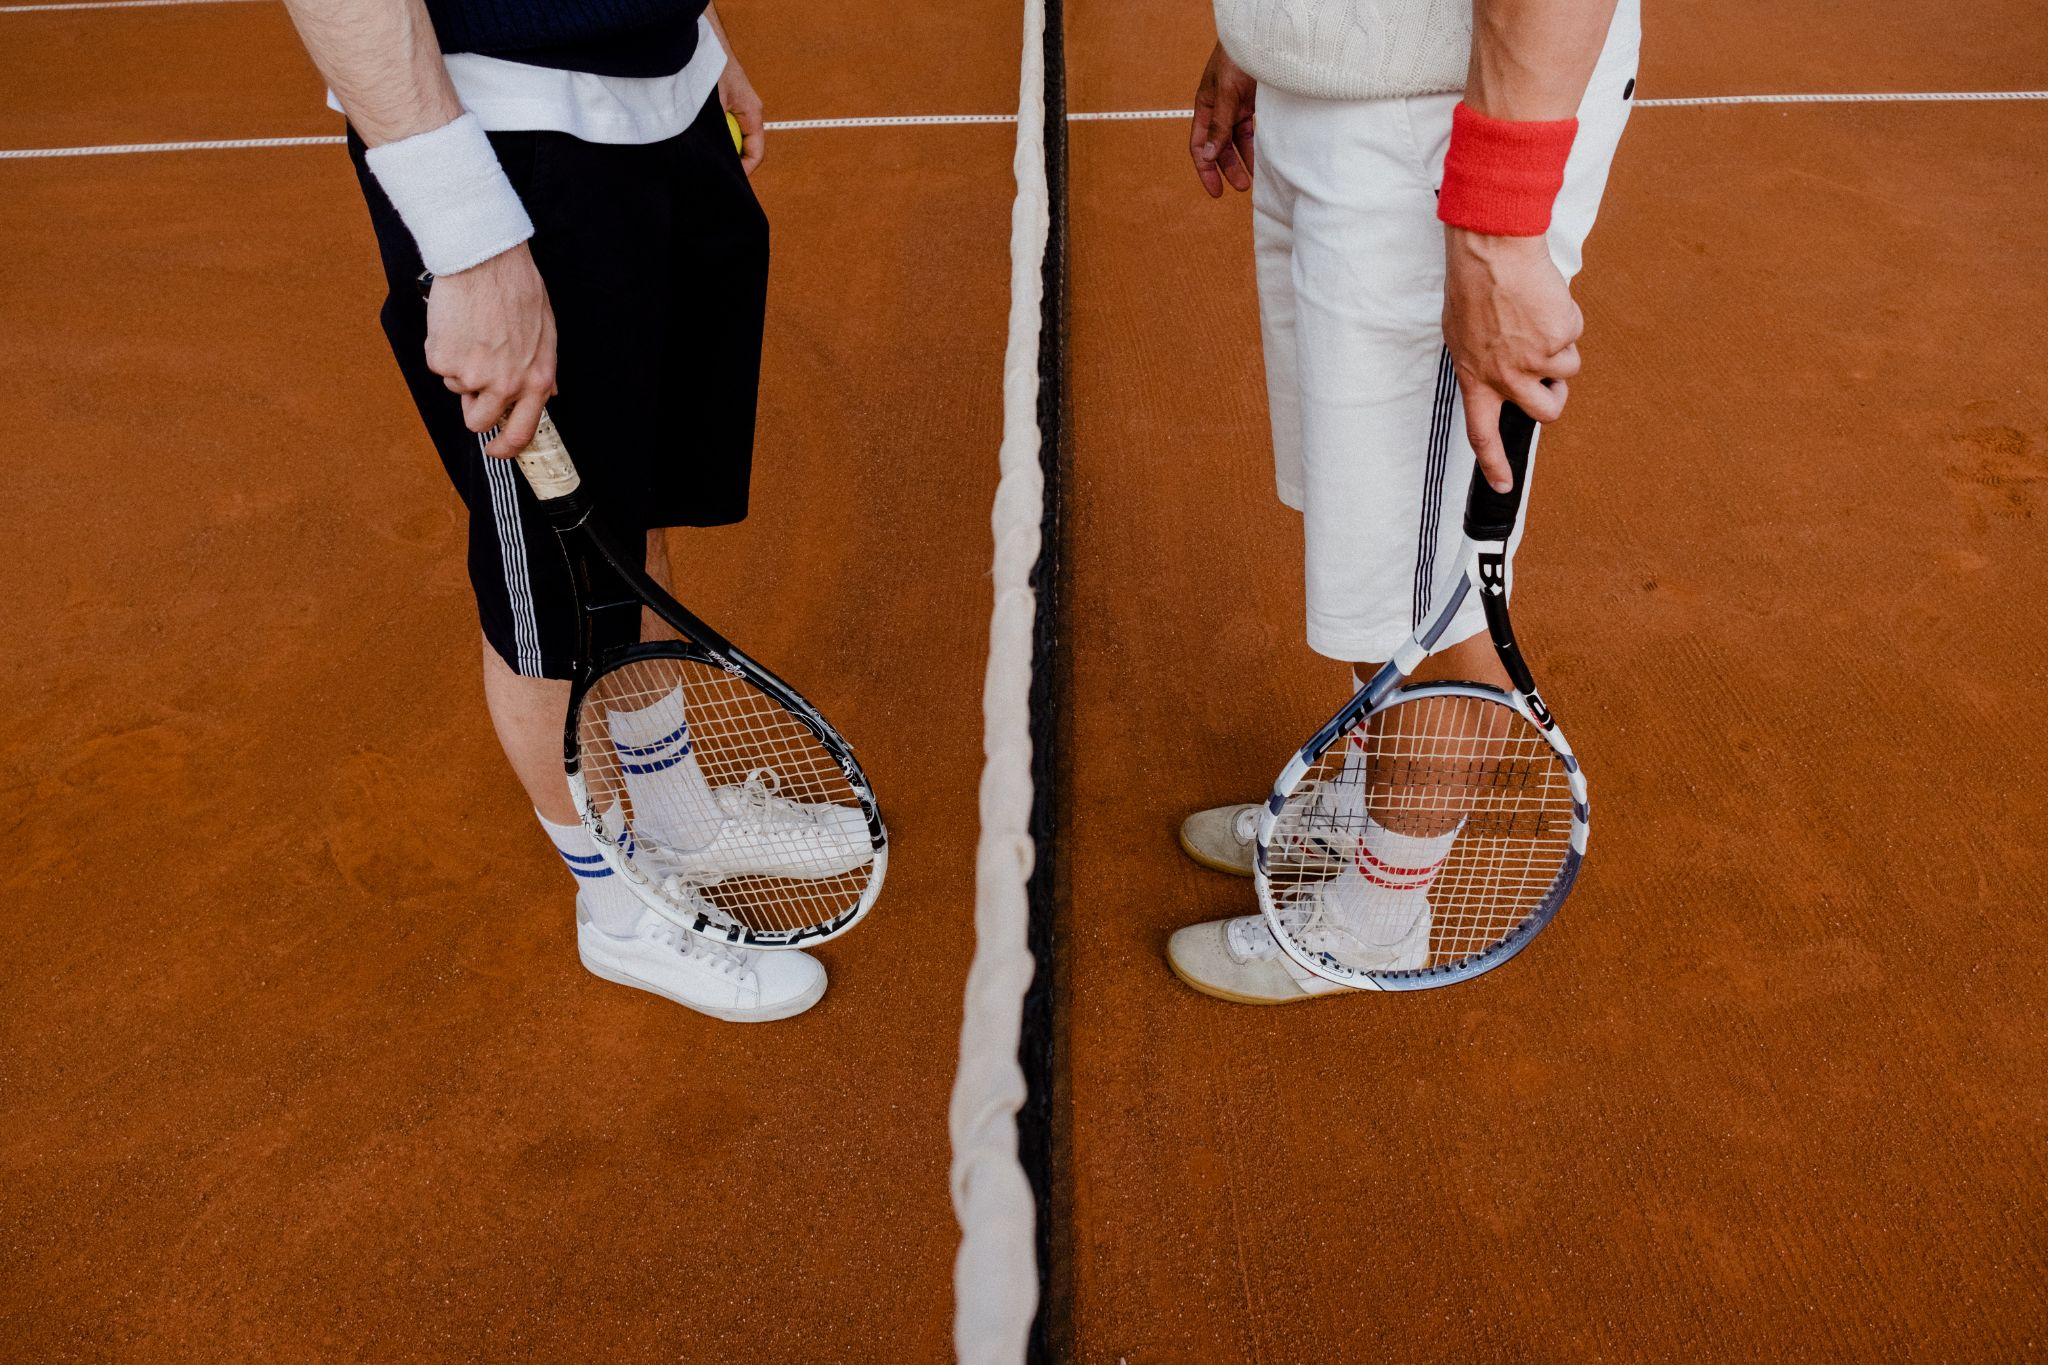 two people holding tennis rackets